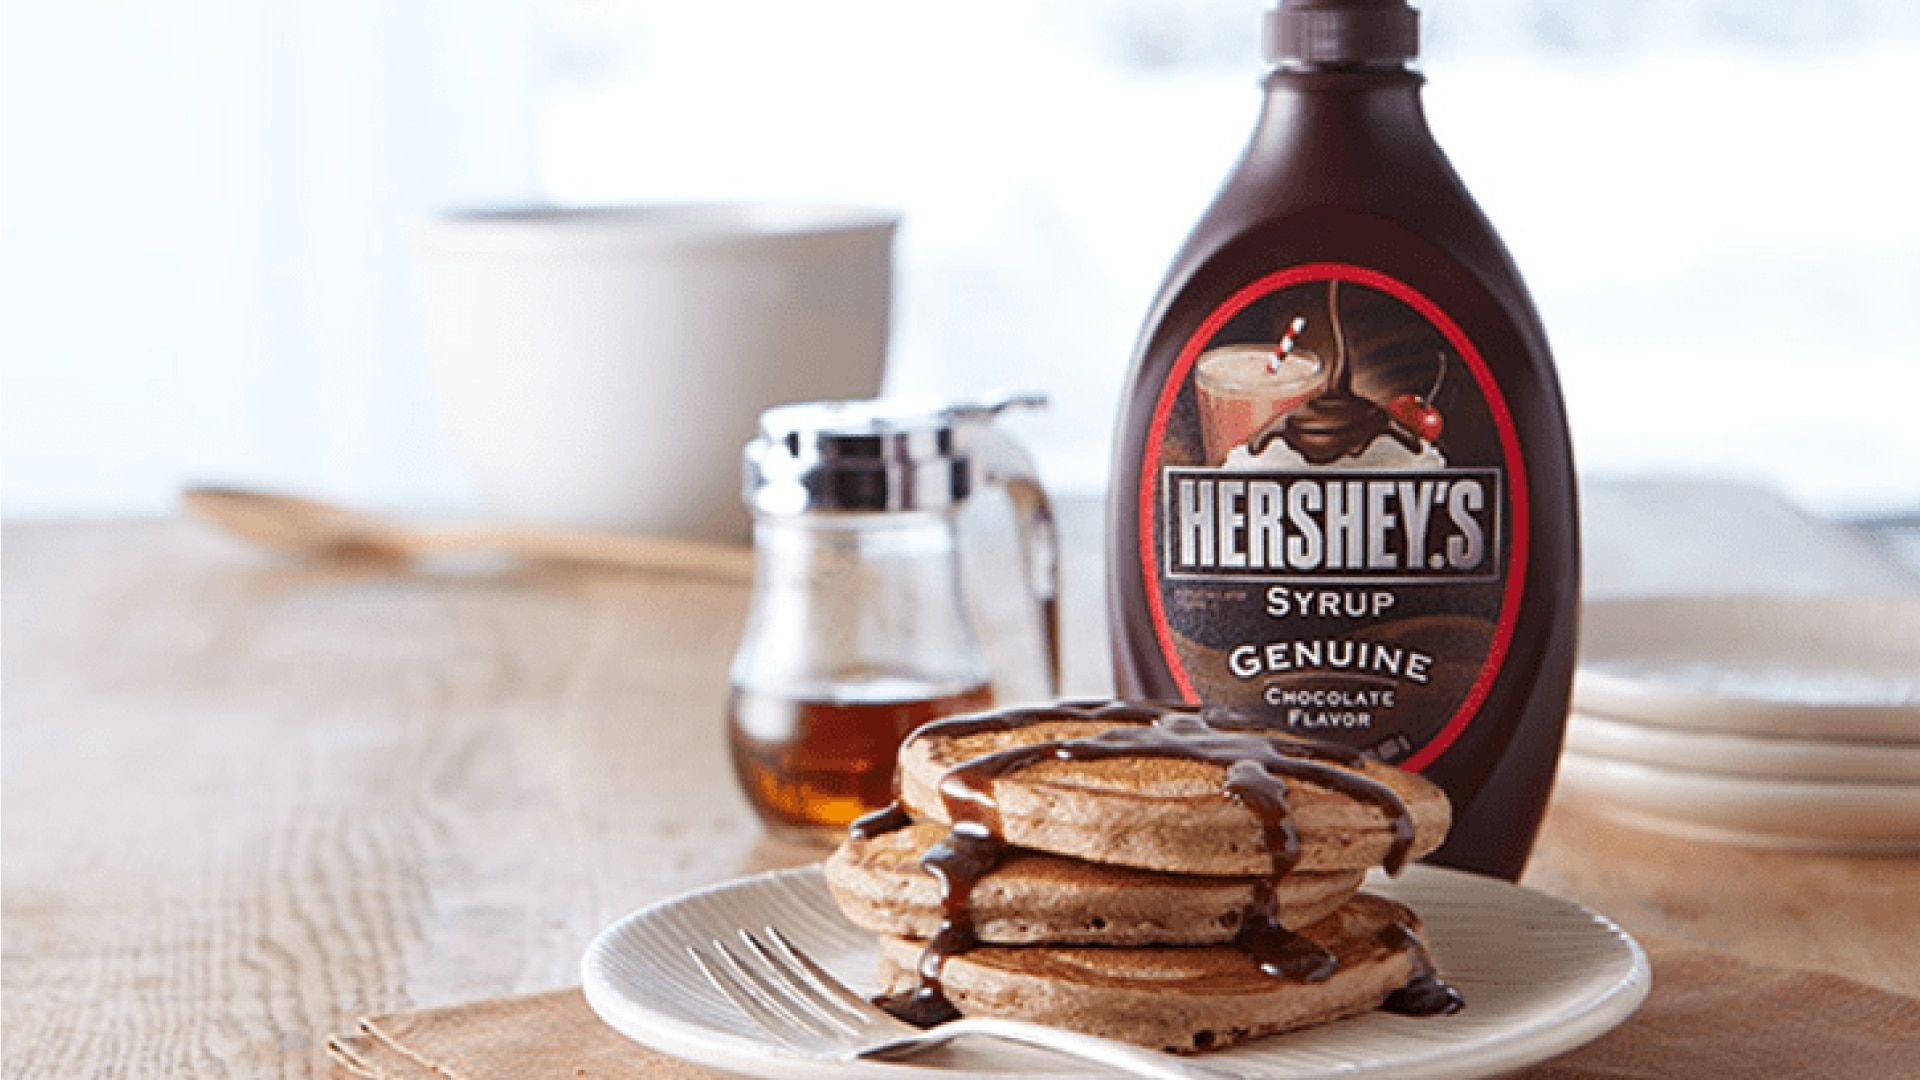 Hershey's chocolate syrup, Dessert topping, Rich and sweet, Delicious condiment, 1920x1080 Full HD Desktop